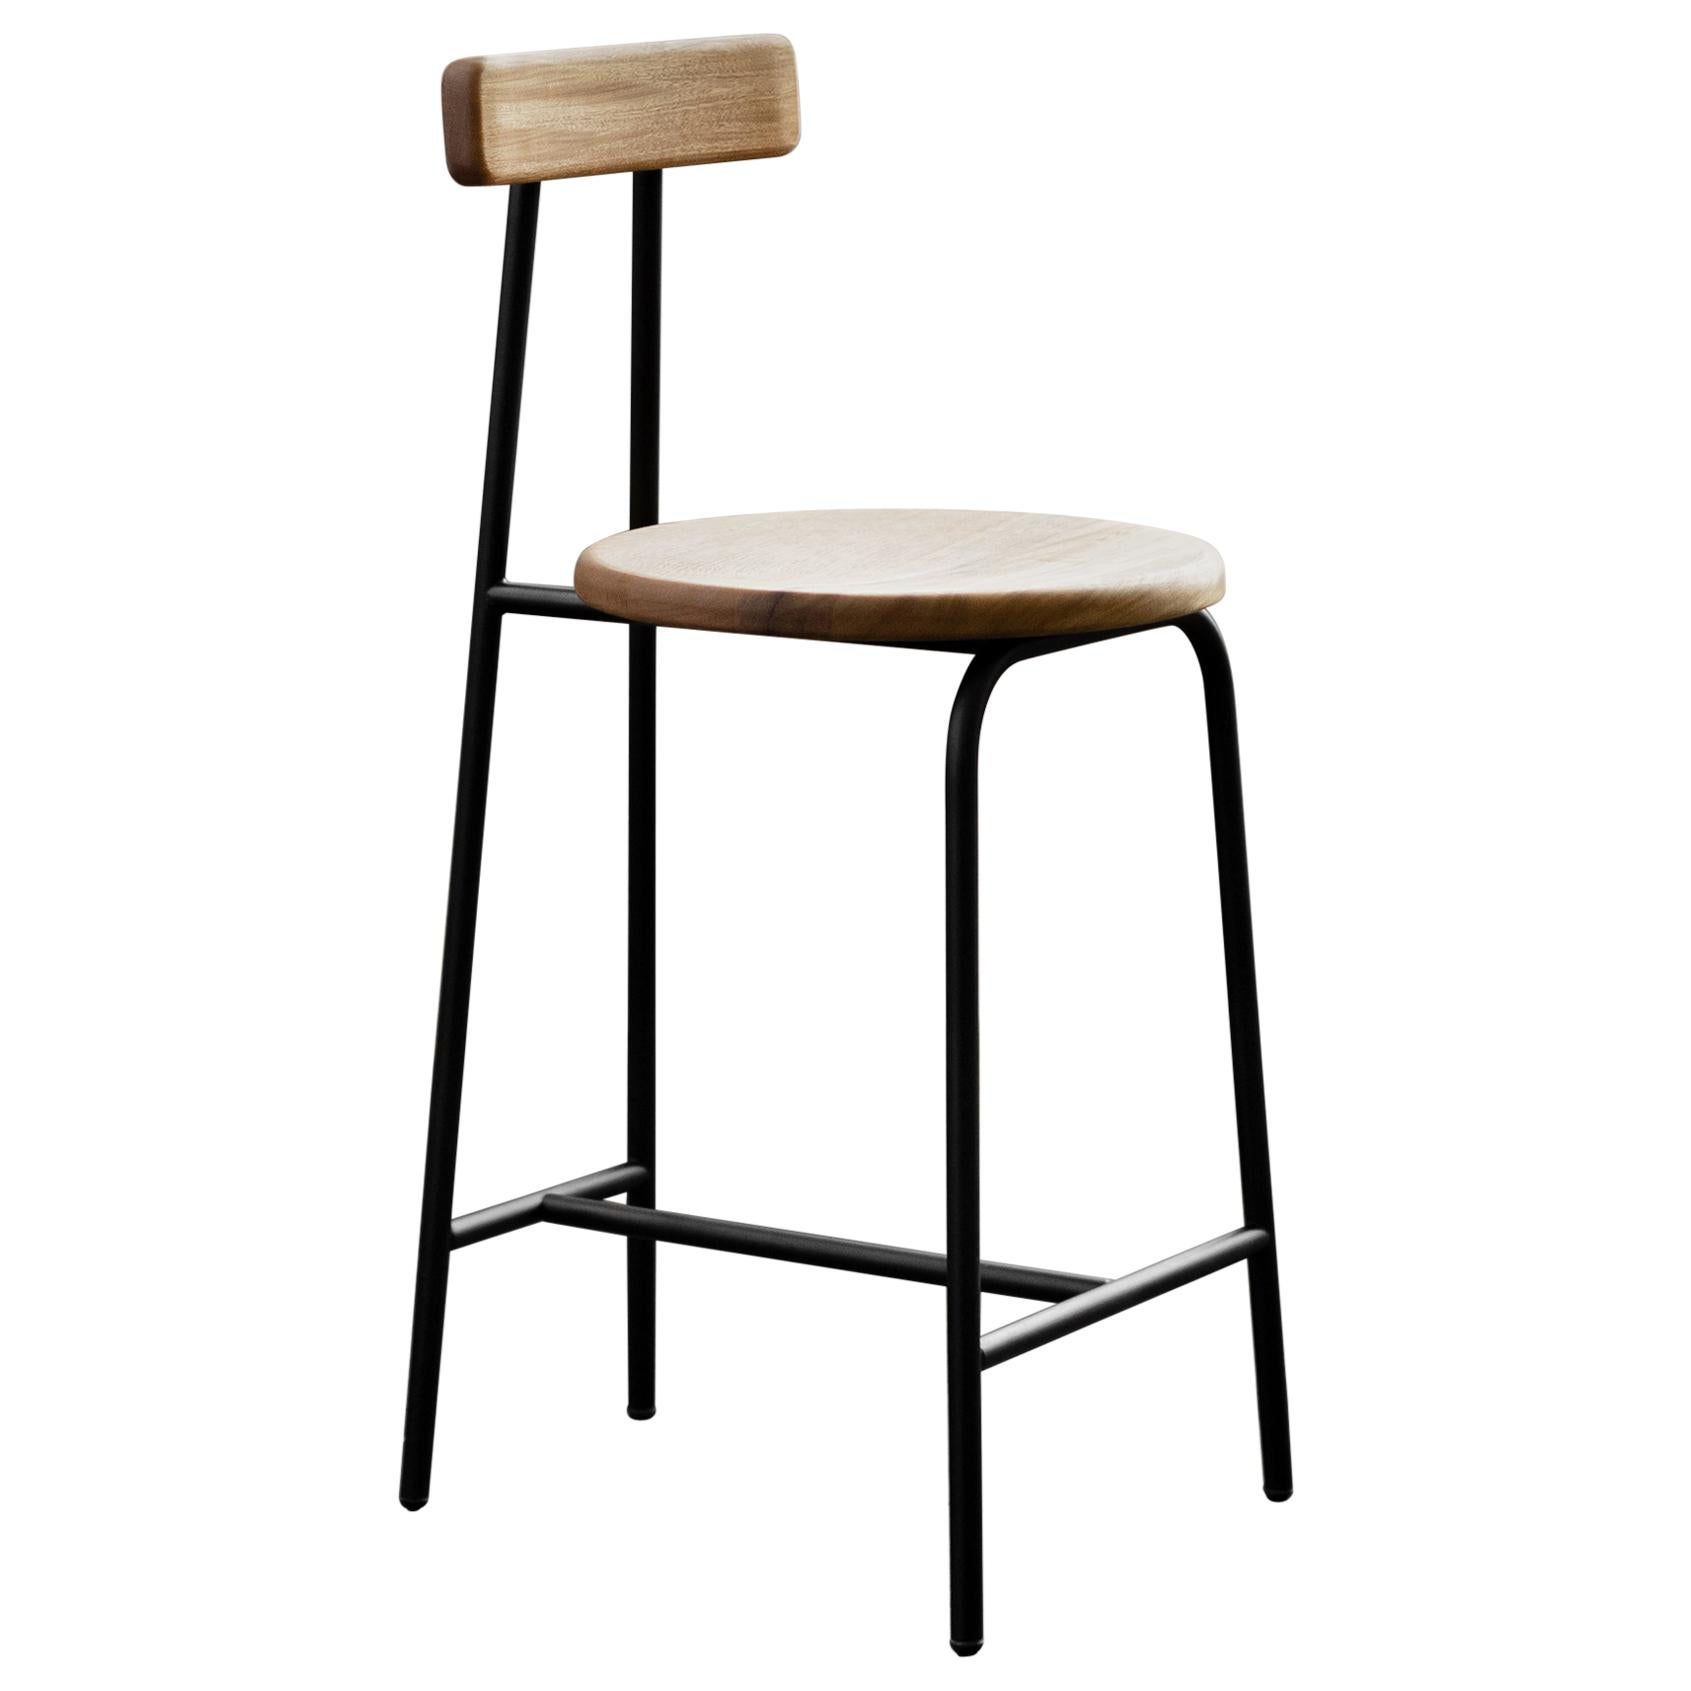 I Collection Wooden Stool with Metallic Structure For Sale